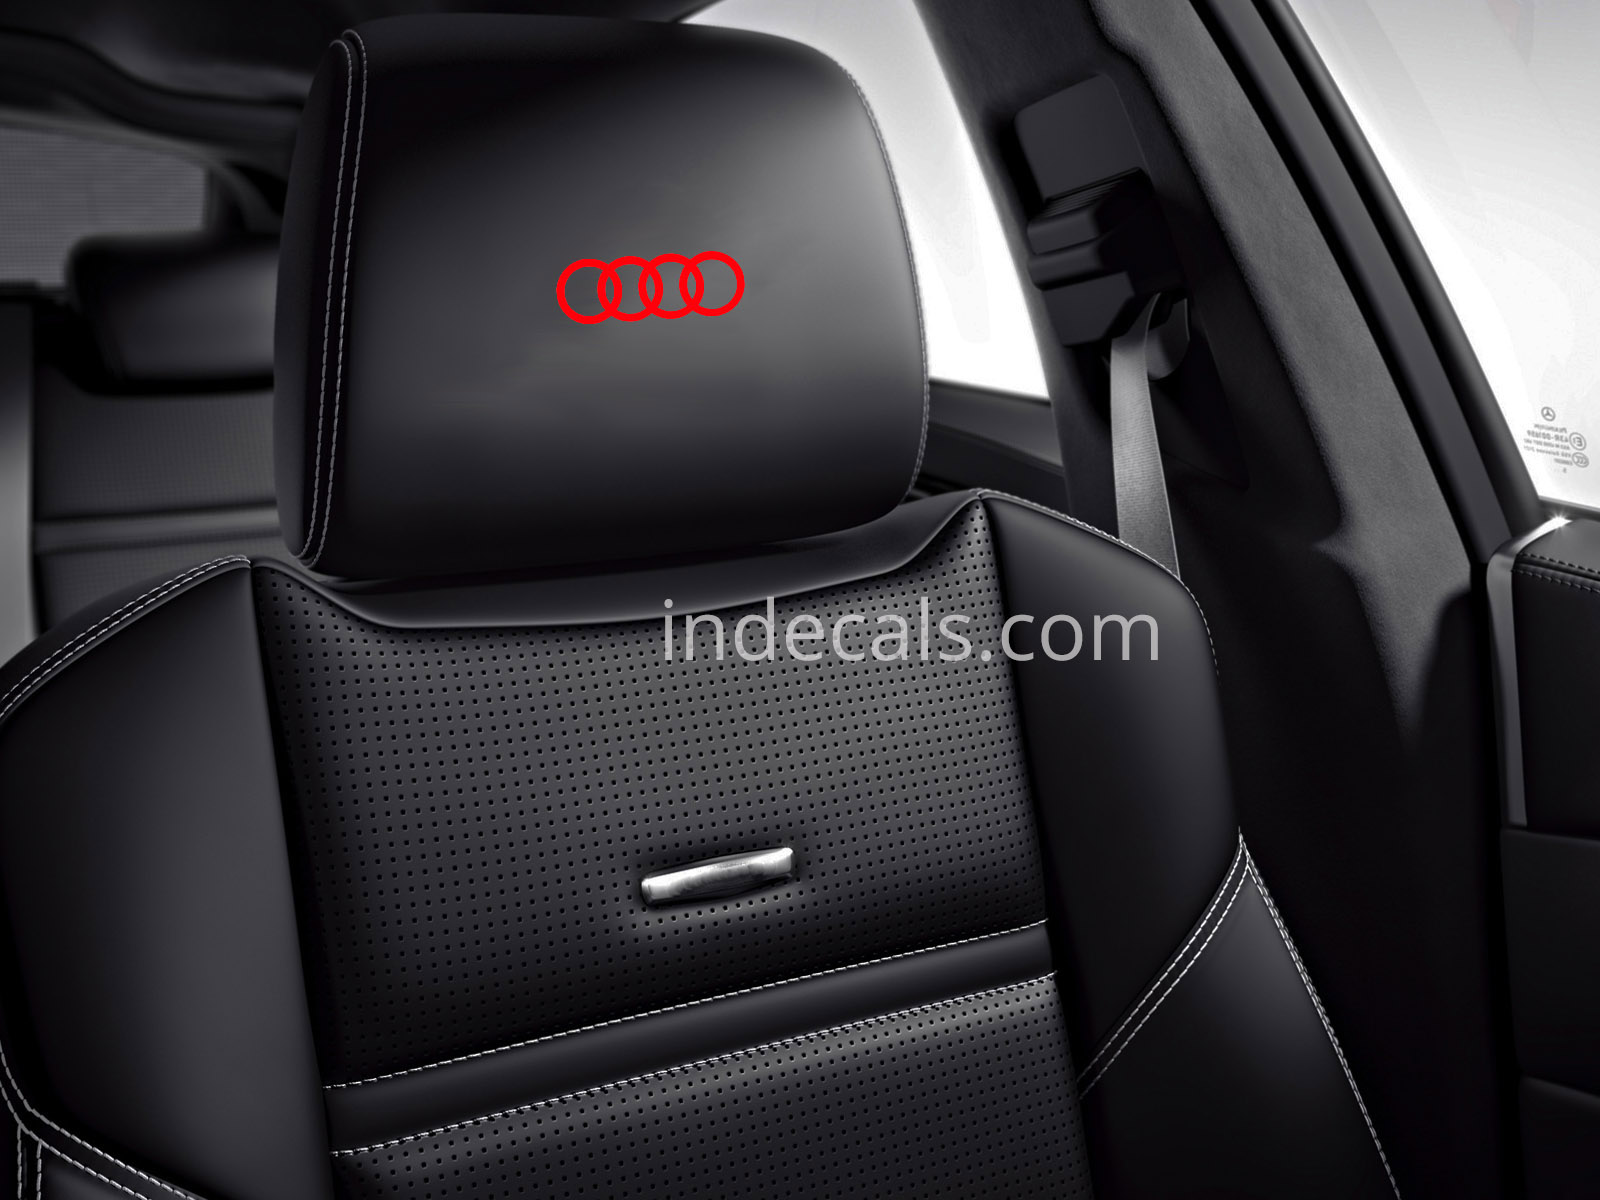 6 x Audi Rings Stickers for Headrests - Red